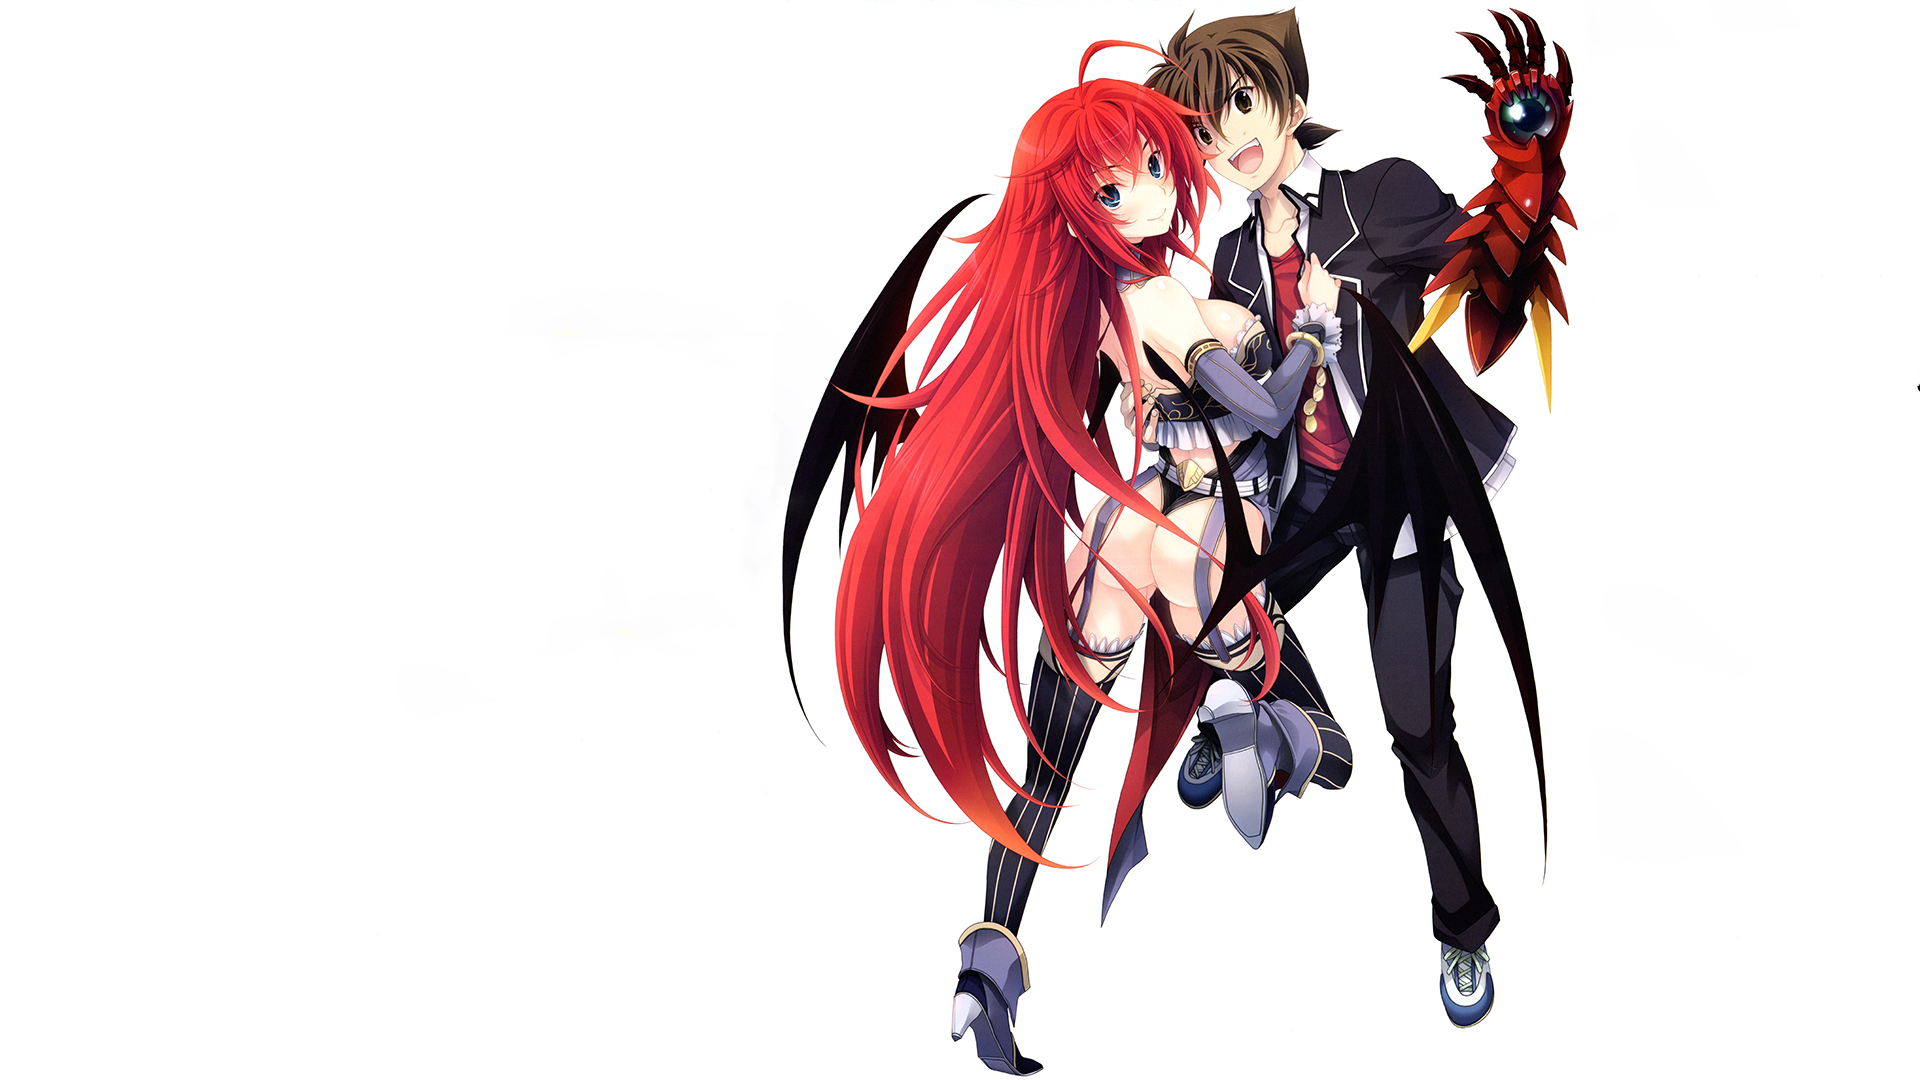 Anime 1920x1080 anime anime girls High School DxD Gremory Rias Hyoudou Issei redhead long hair blue eyes ass white background simple background stockings black stockings heels anime boys smiling open mouth